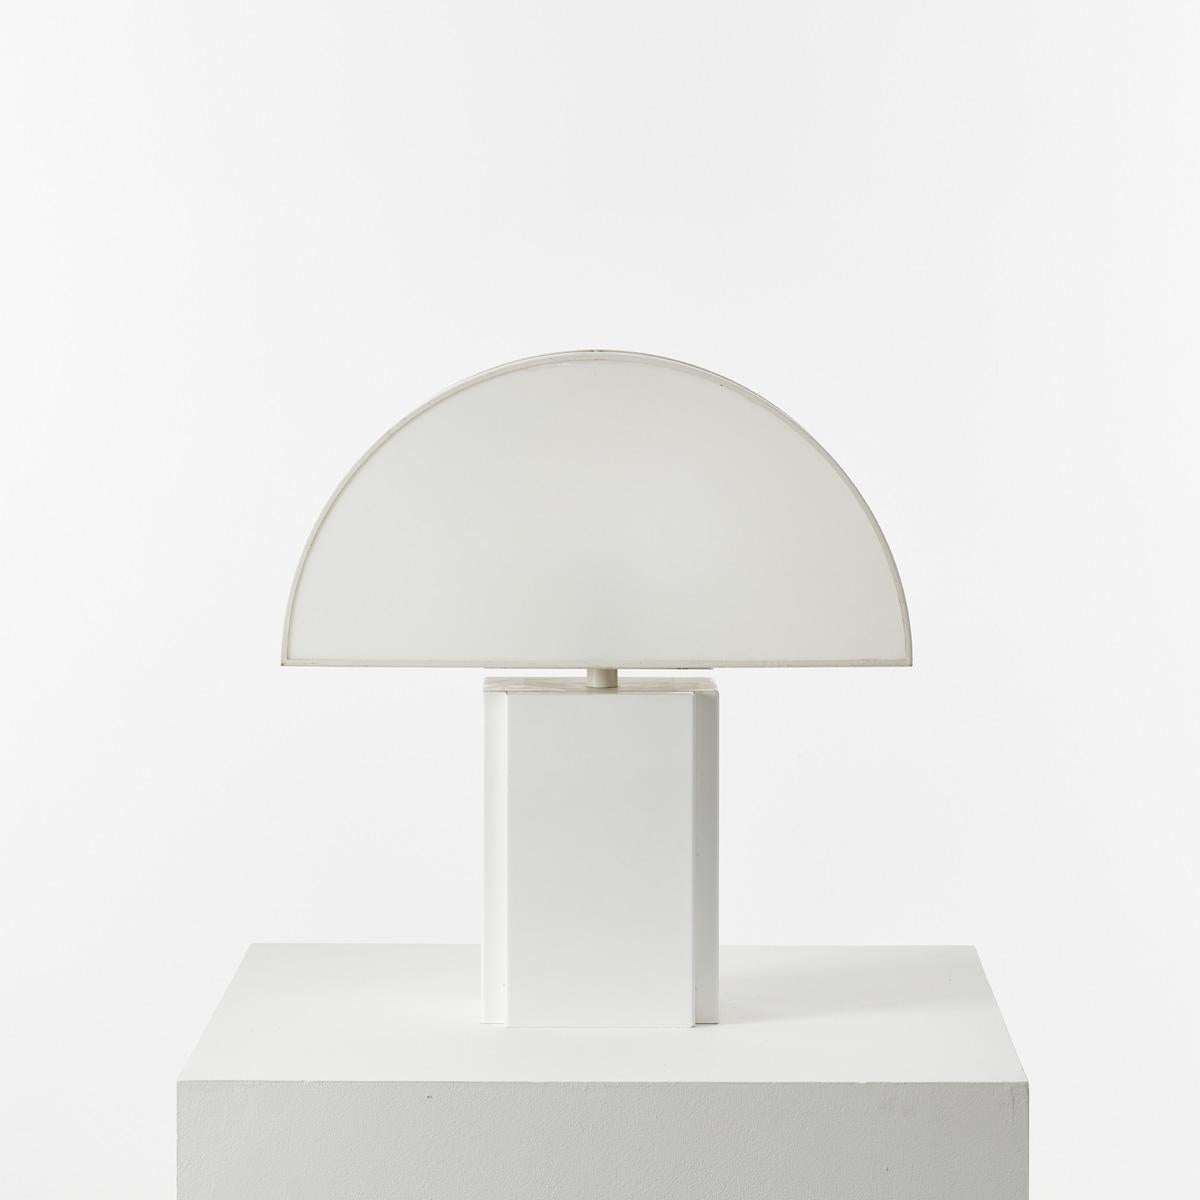 Large Olympe table lamp designed by Harvey Guzzini for ED, Italy 1970s. The demilune shade is particularly pleasing lit, a half moon of ambient light through semi-opaque acrylic. It has a metal base and a plastic shade, open at the back for ease of